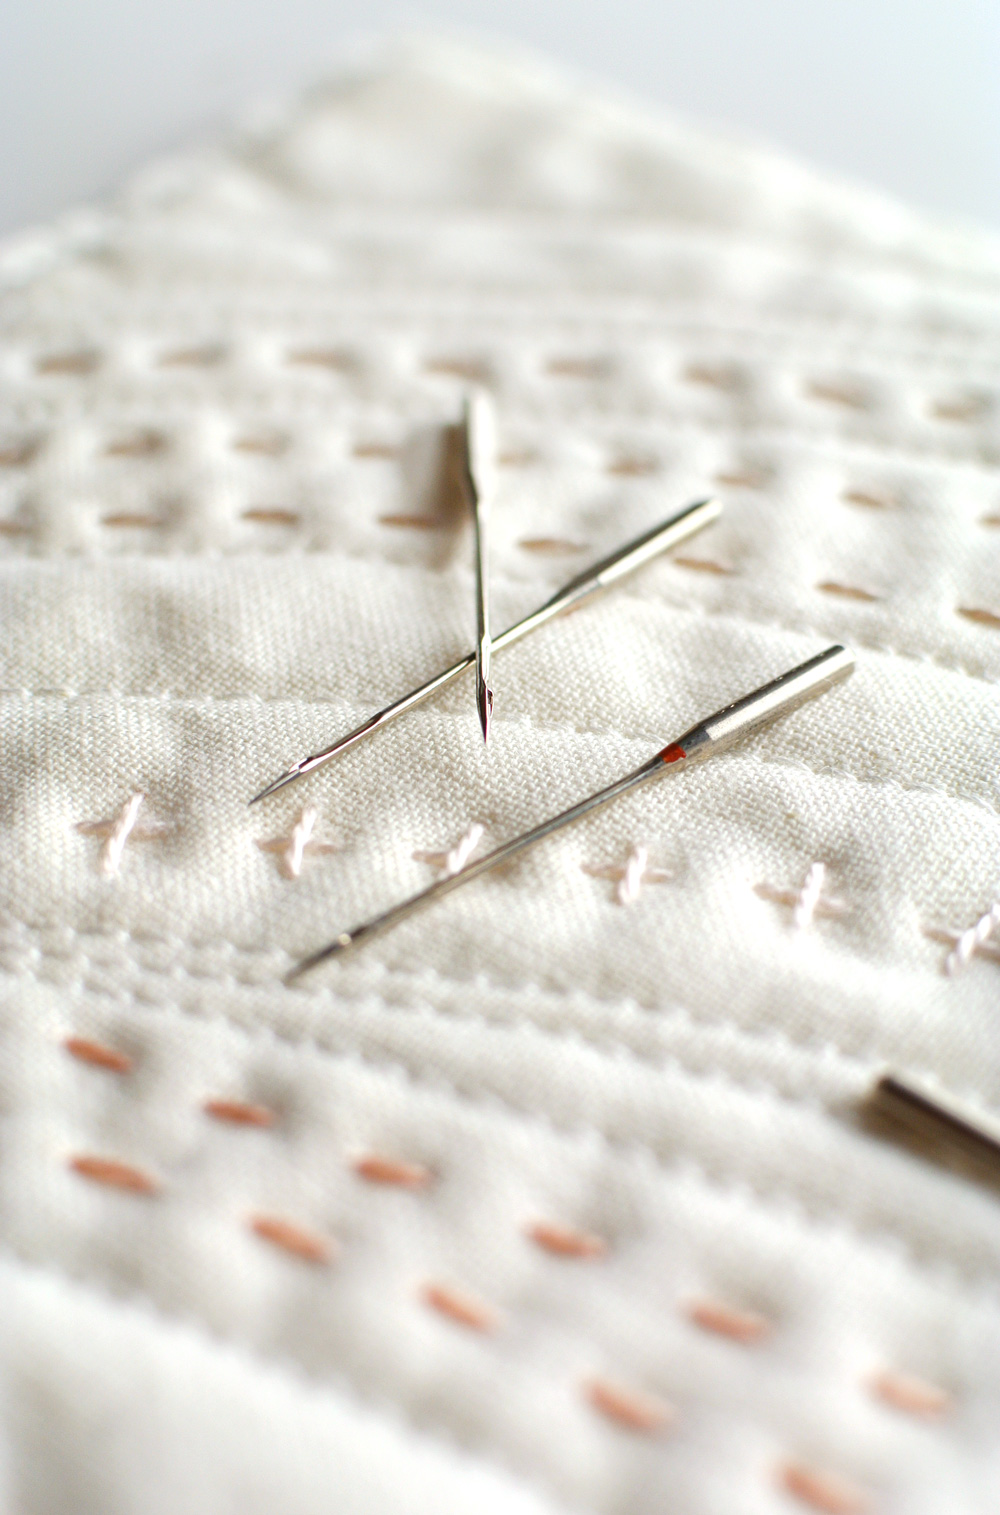 The Truth about Universal Needles... are They Really Universal? All you need to know about Universal Sewing Needles | Suzy Quilts https://suzyquilts.com/universal-needles